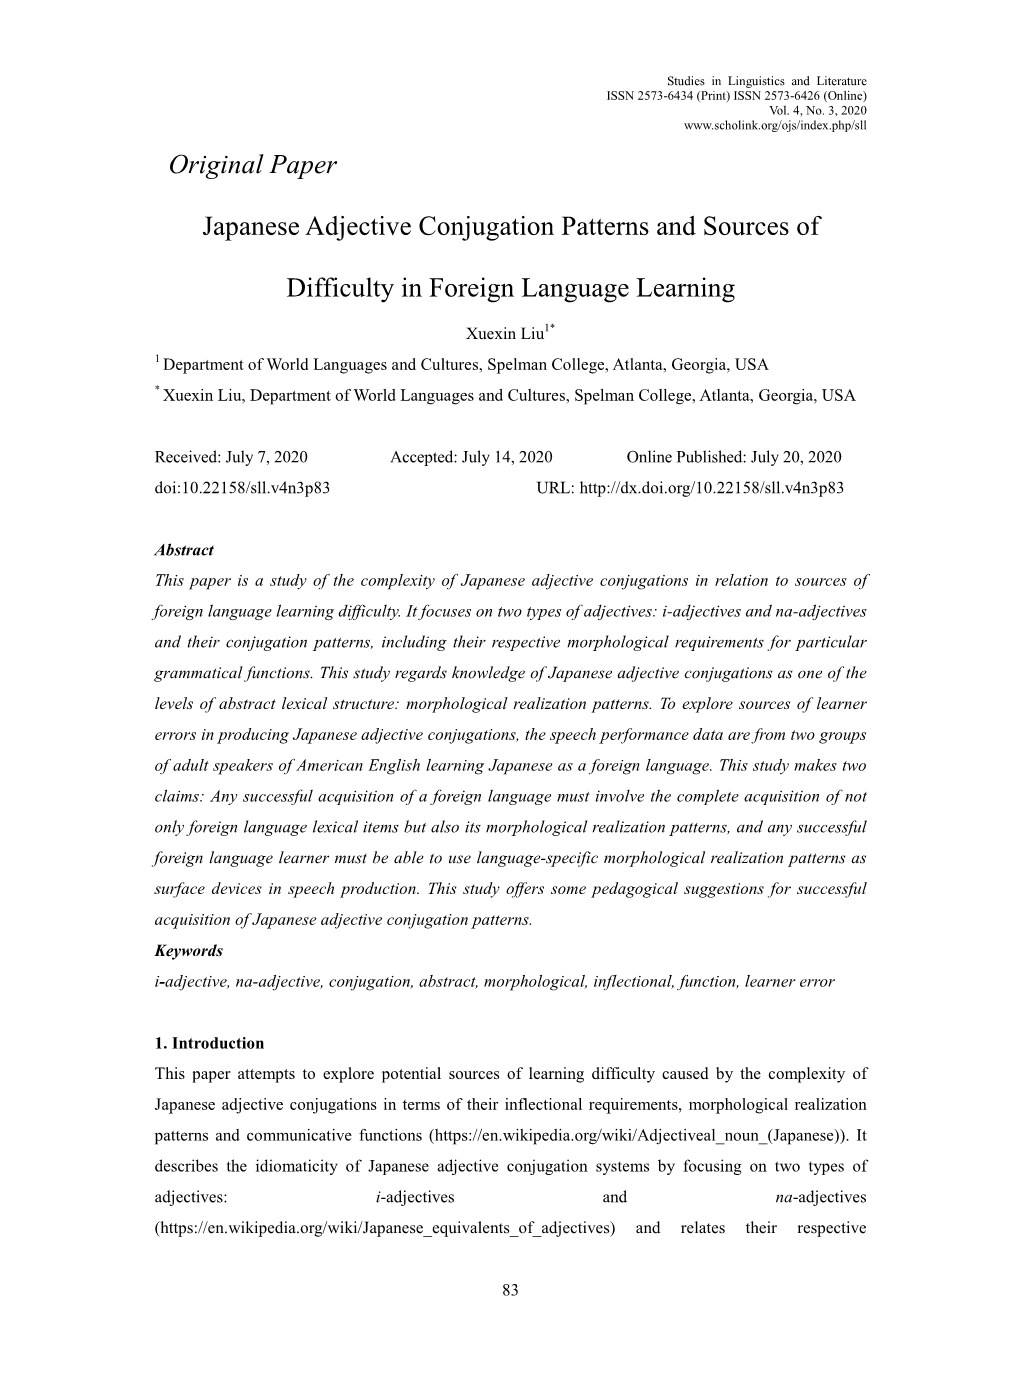 Original Paper Japanese Adjective Conjugation Patterns and Sources of Difficulty in Foreign Language Learning